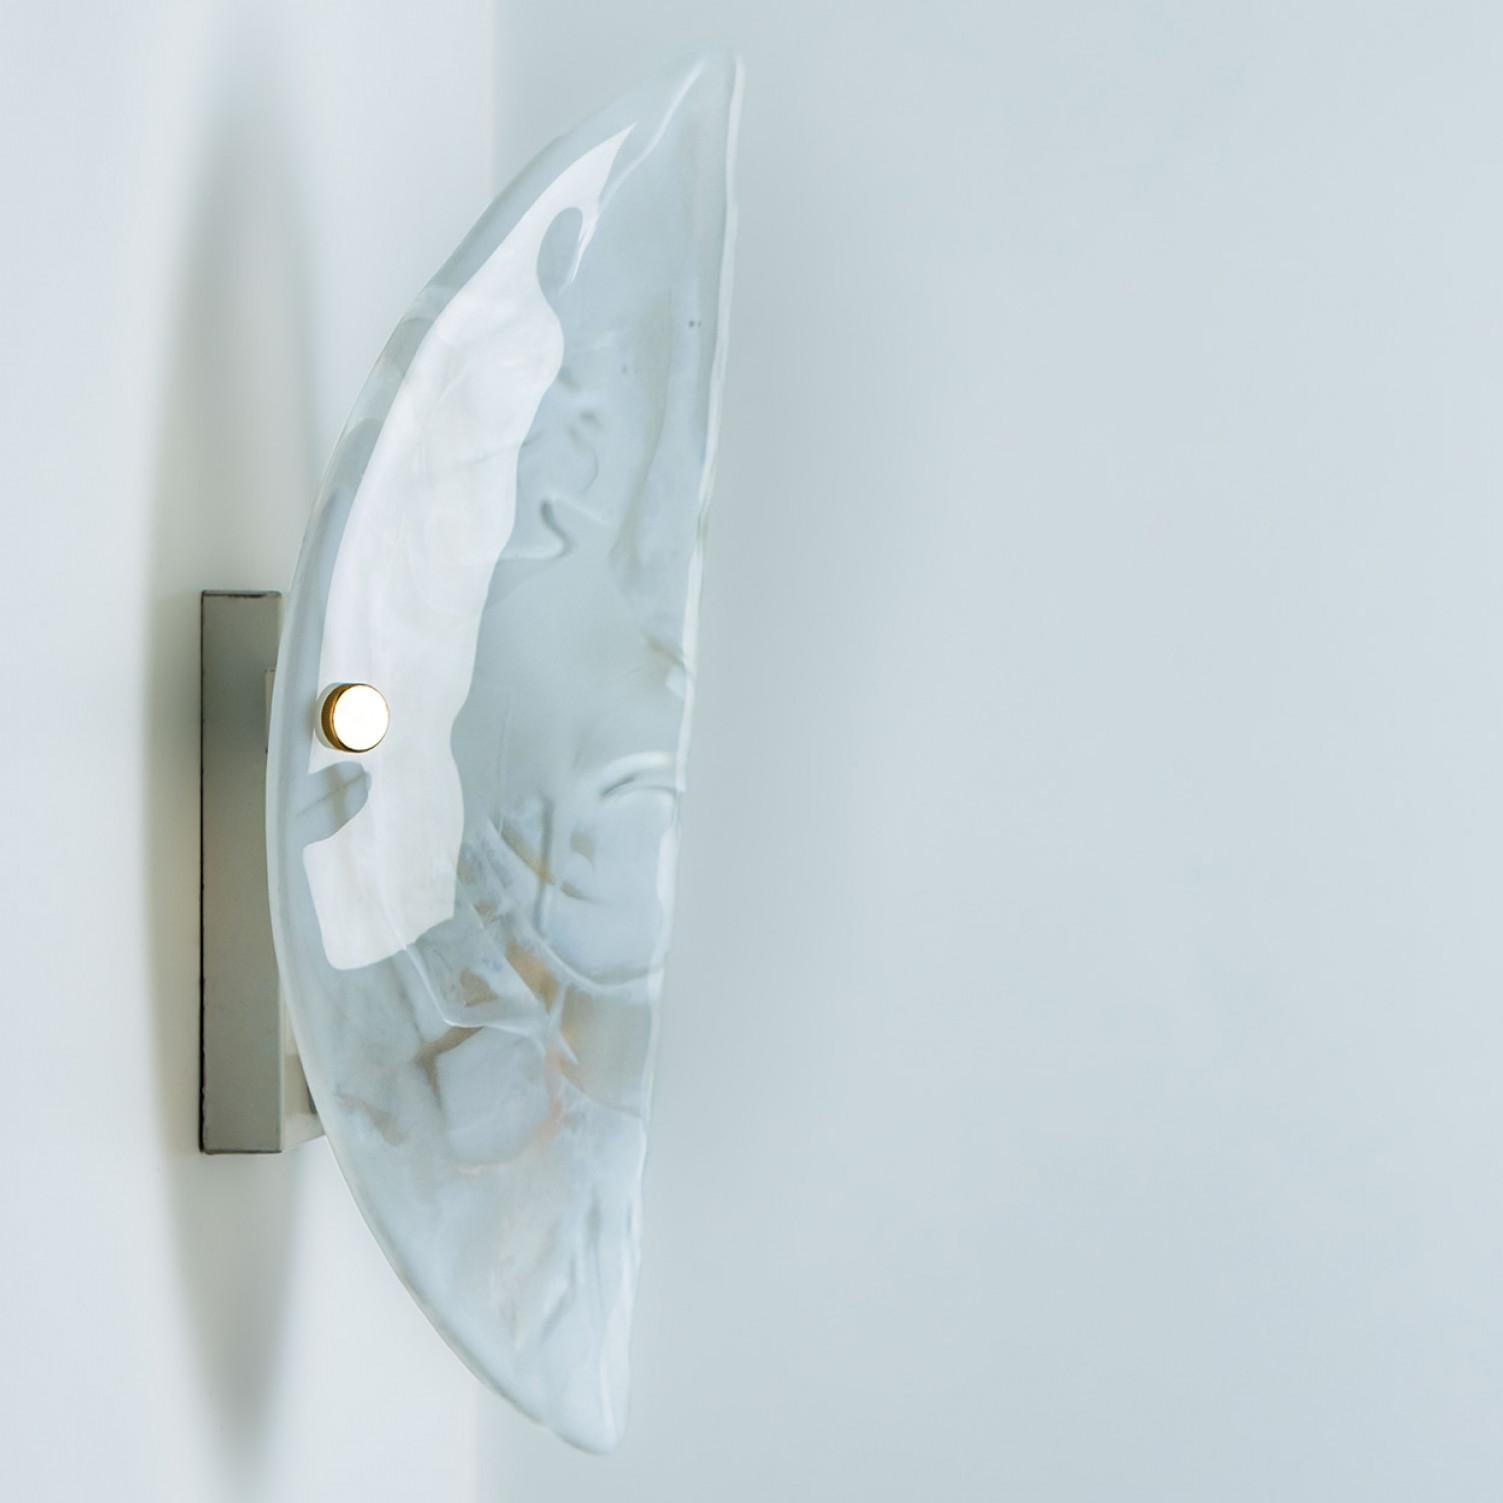 Clean lines to complement all decors.  A wonderful high-end wall light fixture with silver detail and thick marbled blown glass. Manufactured in the 1960s.
The glass of the light fixtures are made of clear textured glass giving the piece a playful